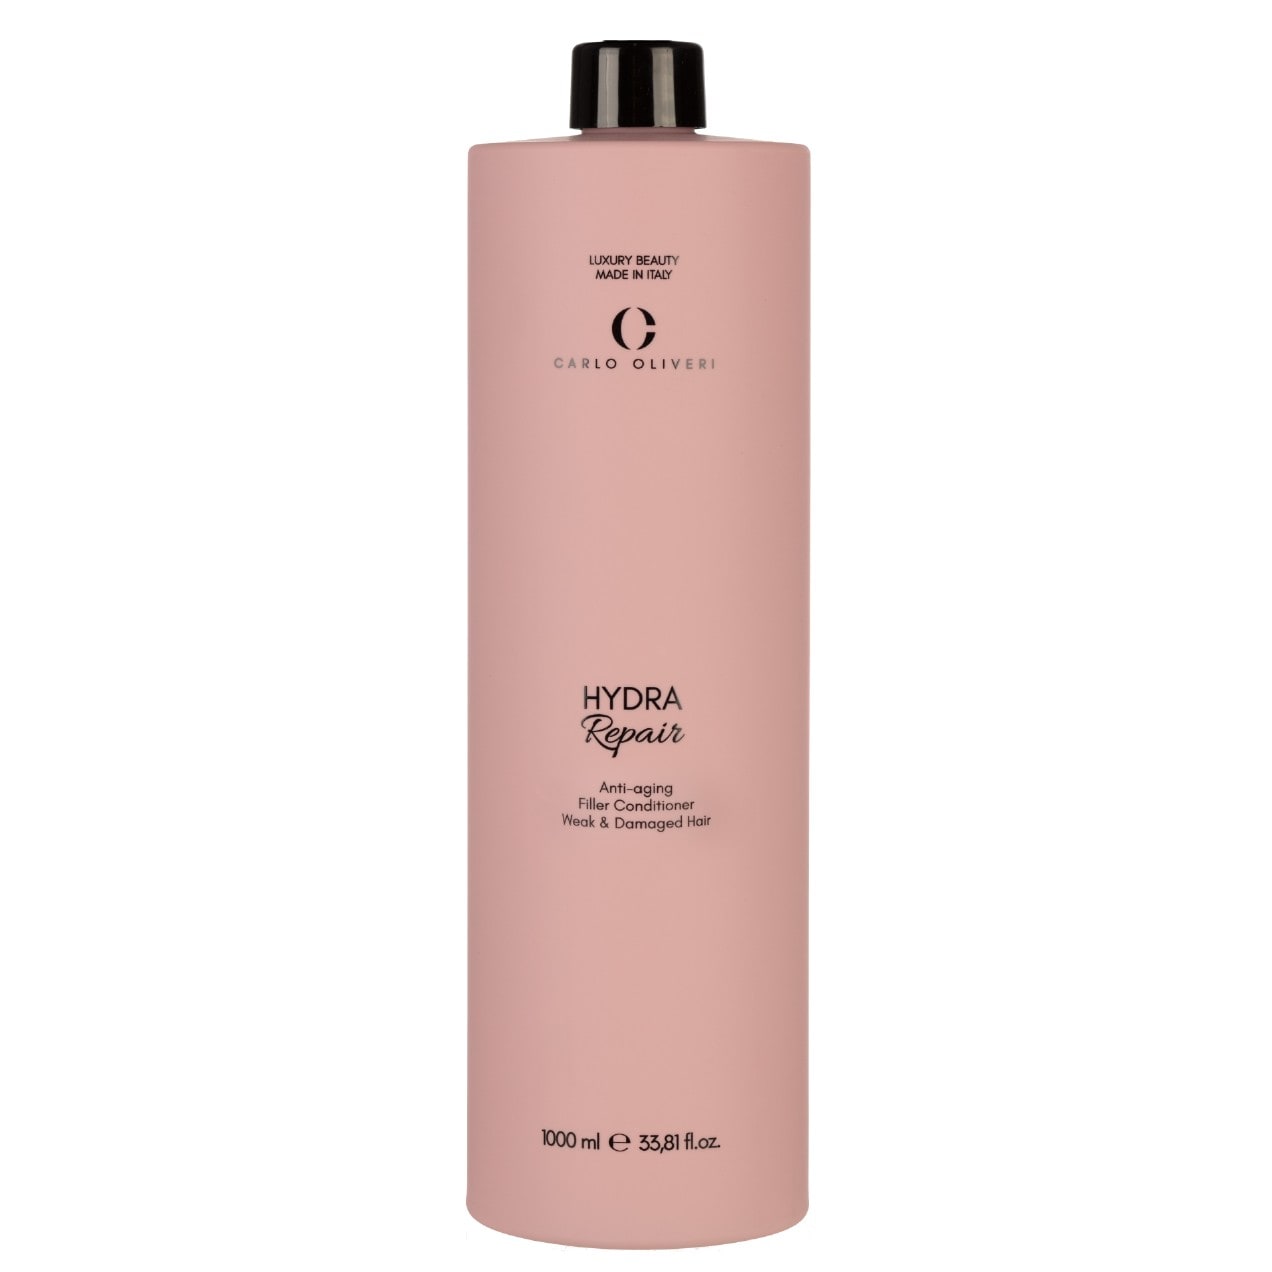 Carlo Oliveri Hydra Repair Anti-Aging Filler Conditioner for weak and damaged hair, 